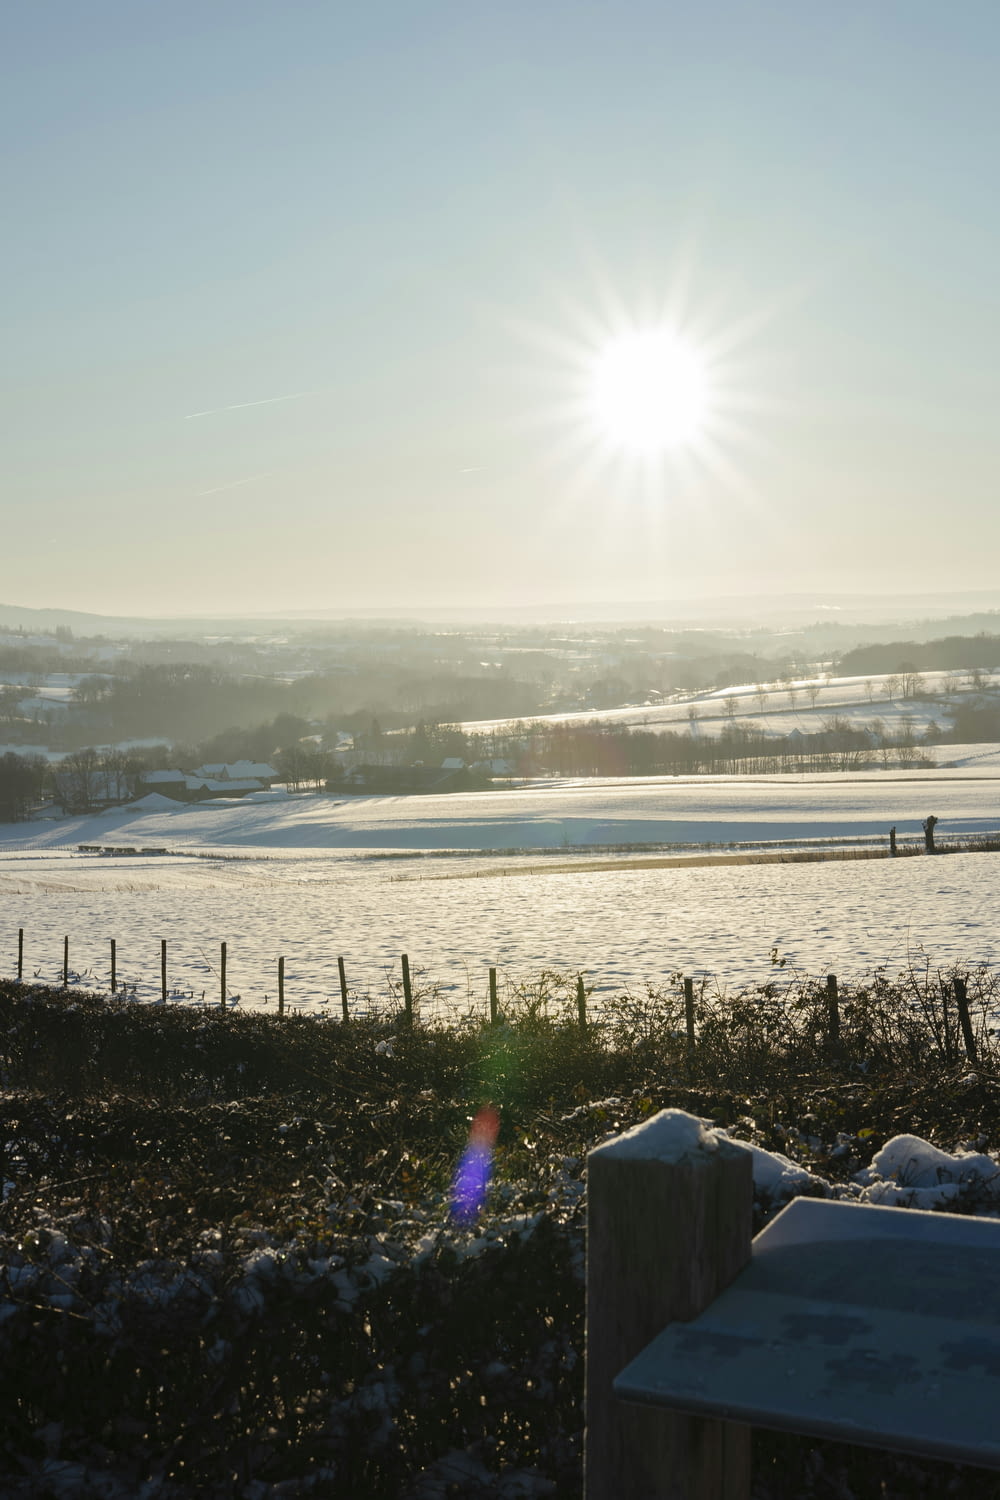 the sun is shining over a snowy field